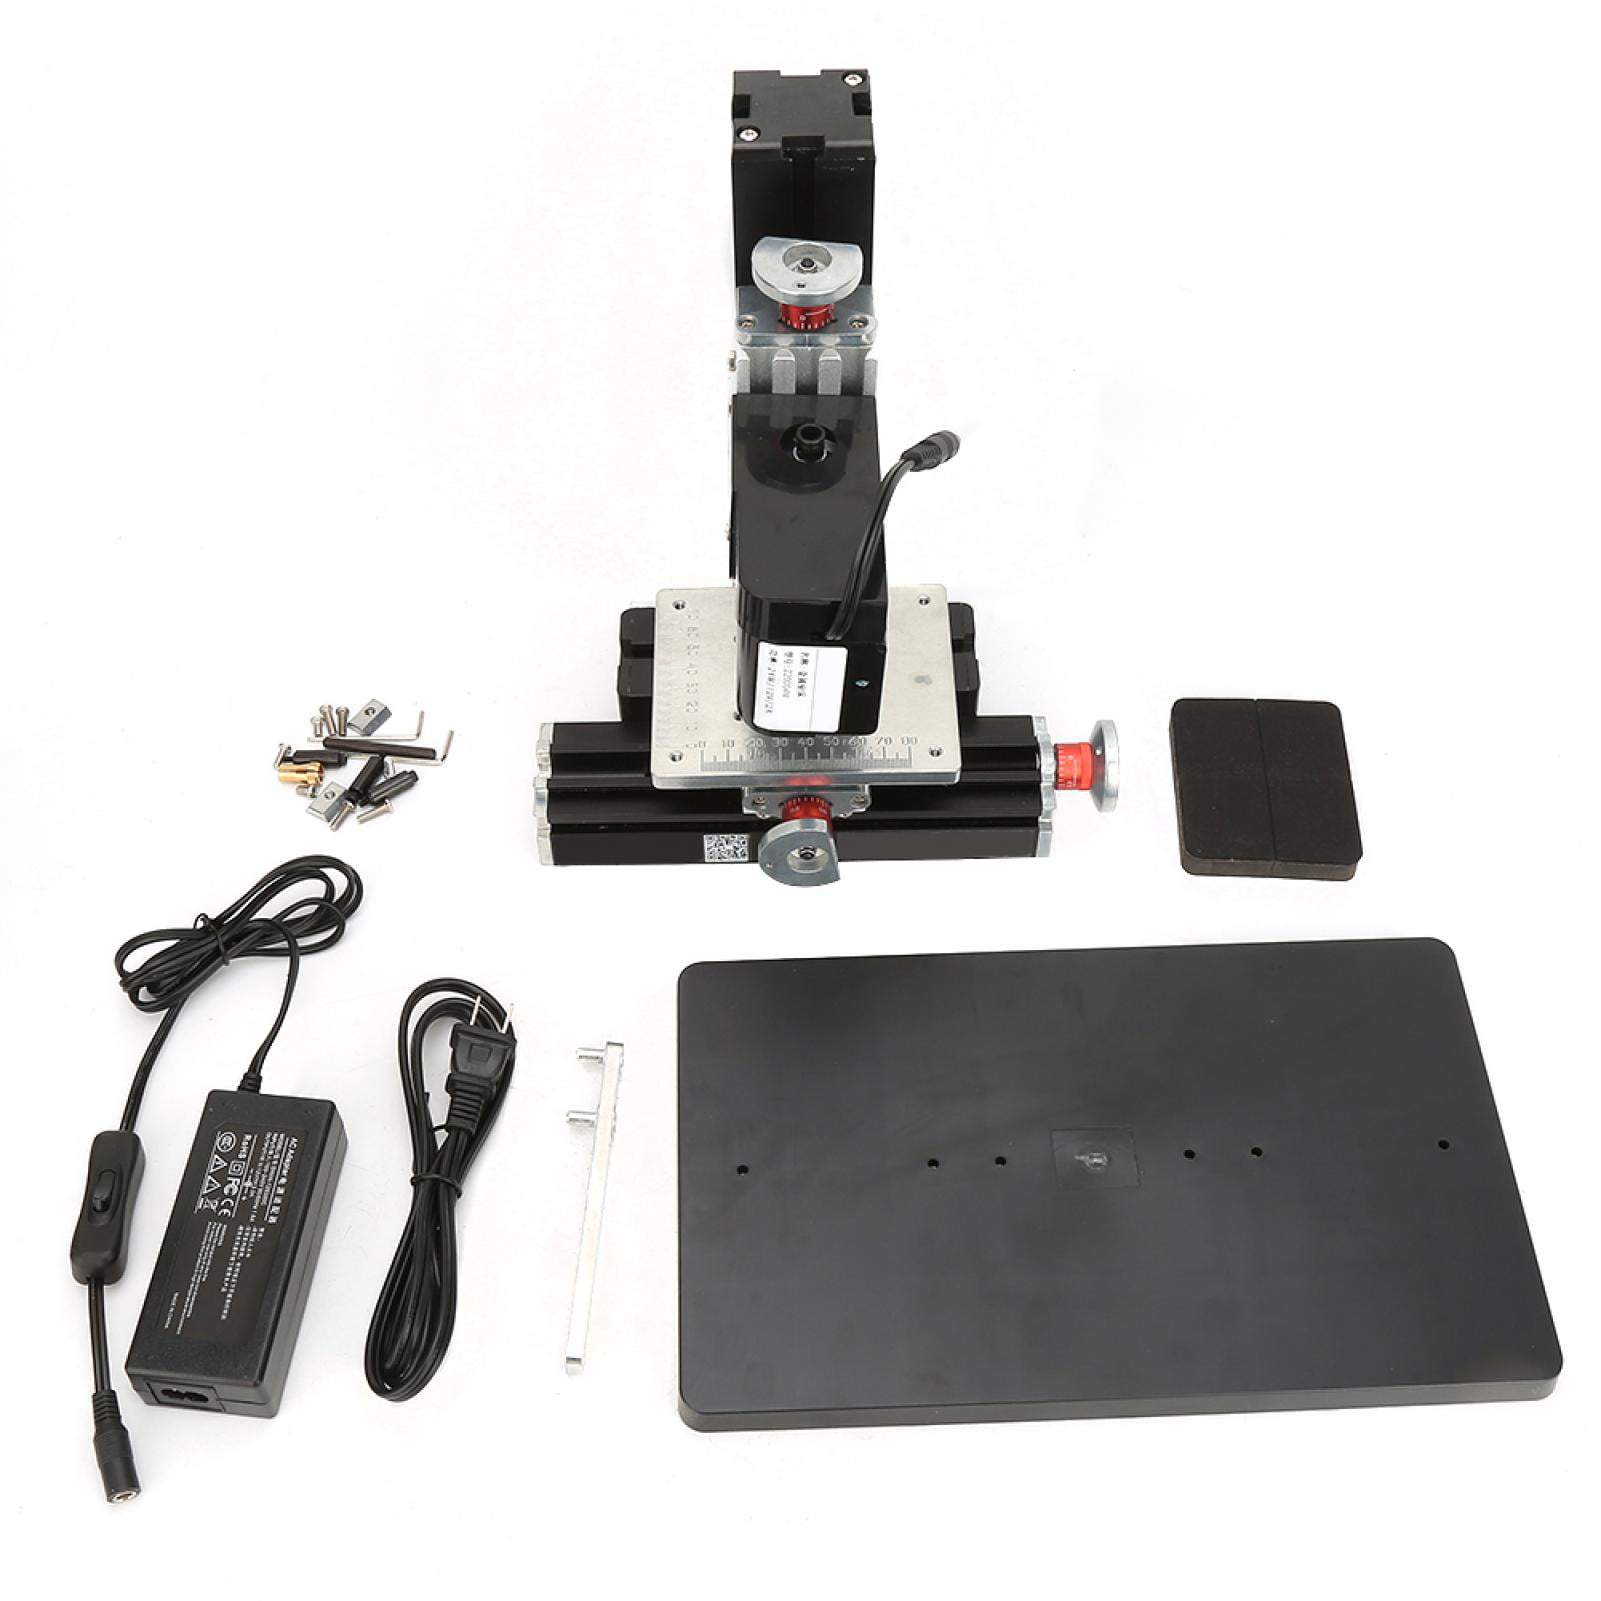 Details about   Z20004M 12VDC 2A 24W Mini Drill Press Stand Metal Drilling Machine 4.8x3.9in 